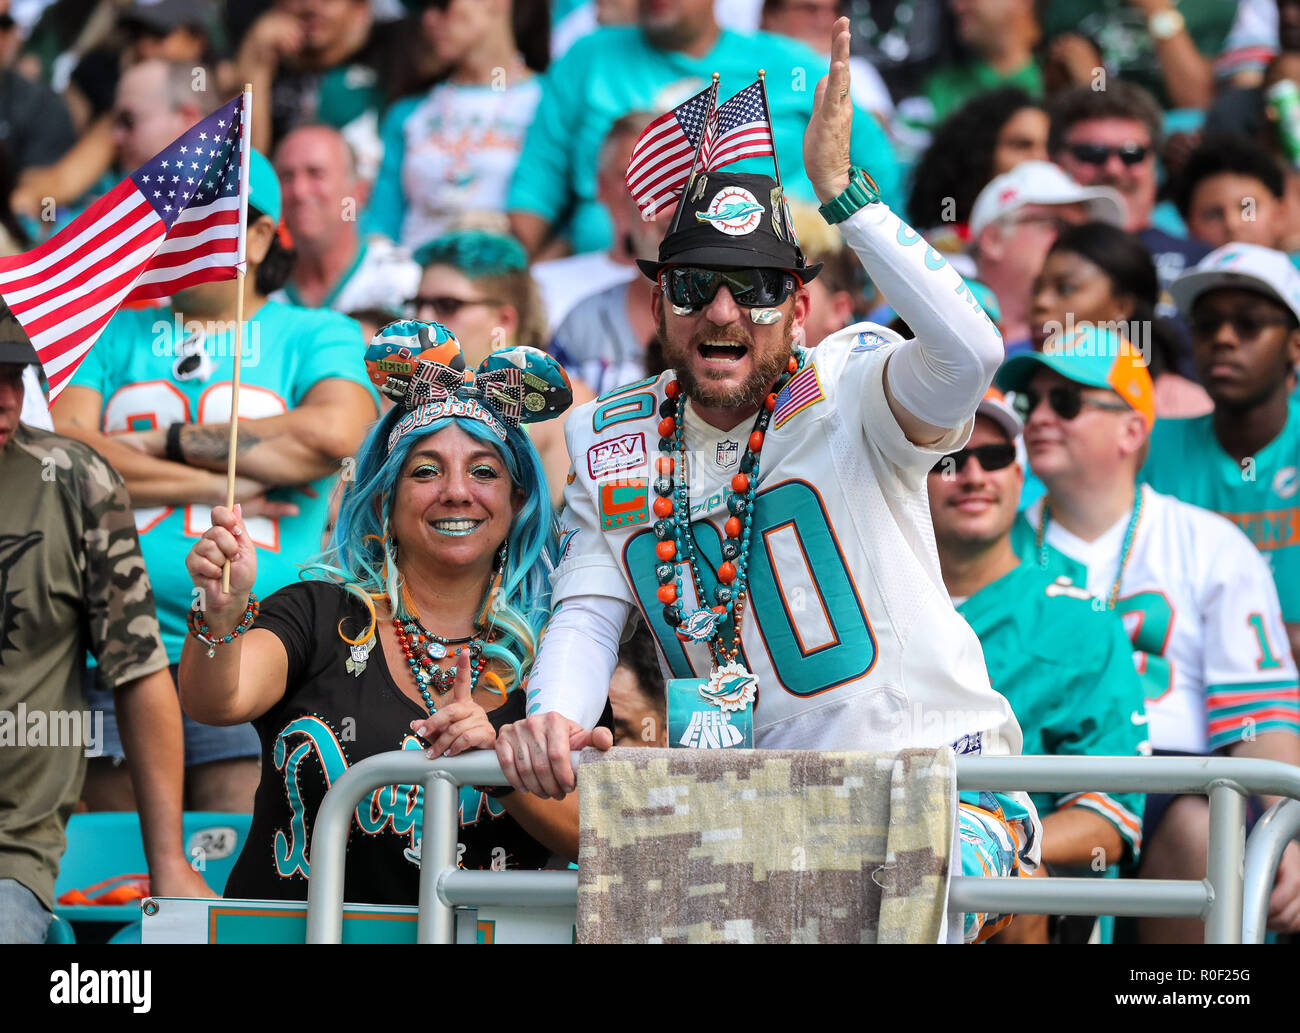 Miami Gardens, Florida, USA. 4th Nov, Miami fans show their support for the team during an NFL football game between the New York Jets and the Miami Dolphins the